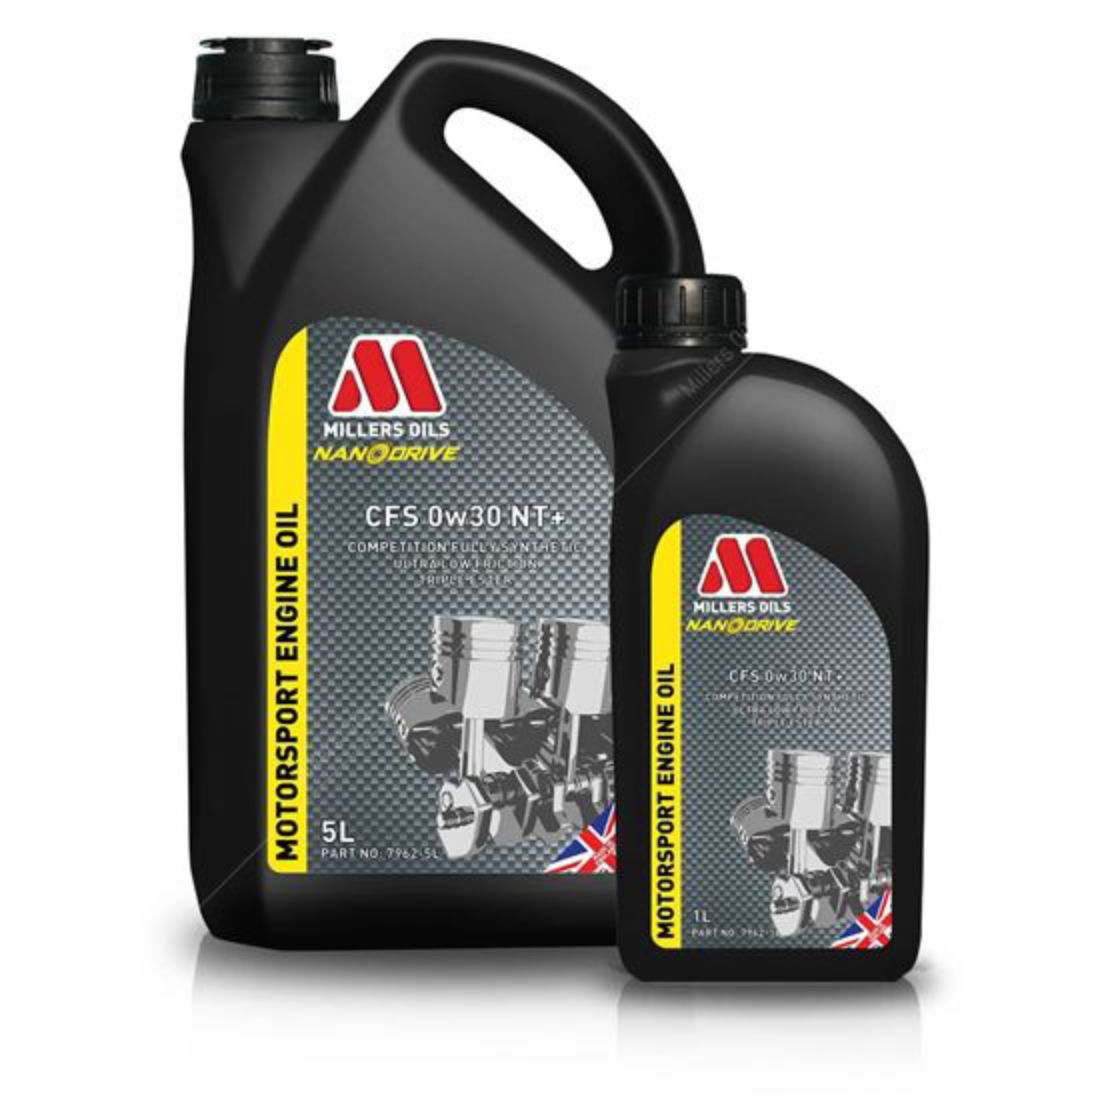 Millers Oils Nanodrive CFS 0w30 Fully Synthetic Performance Engine Oil